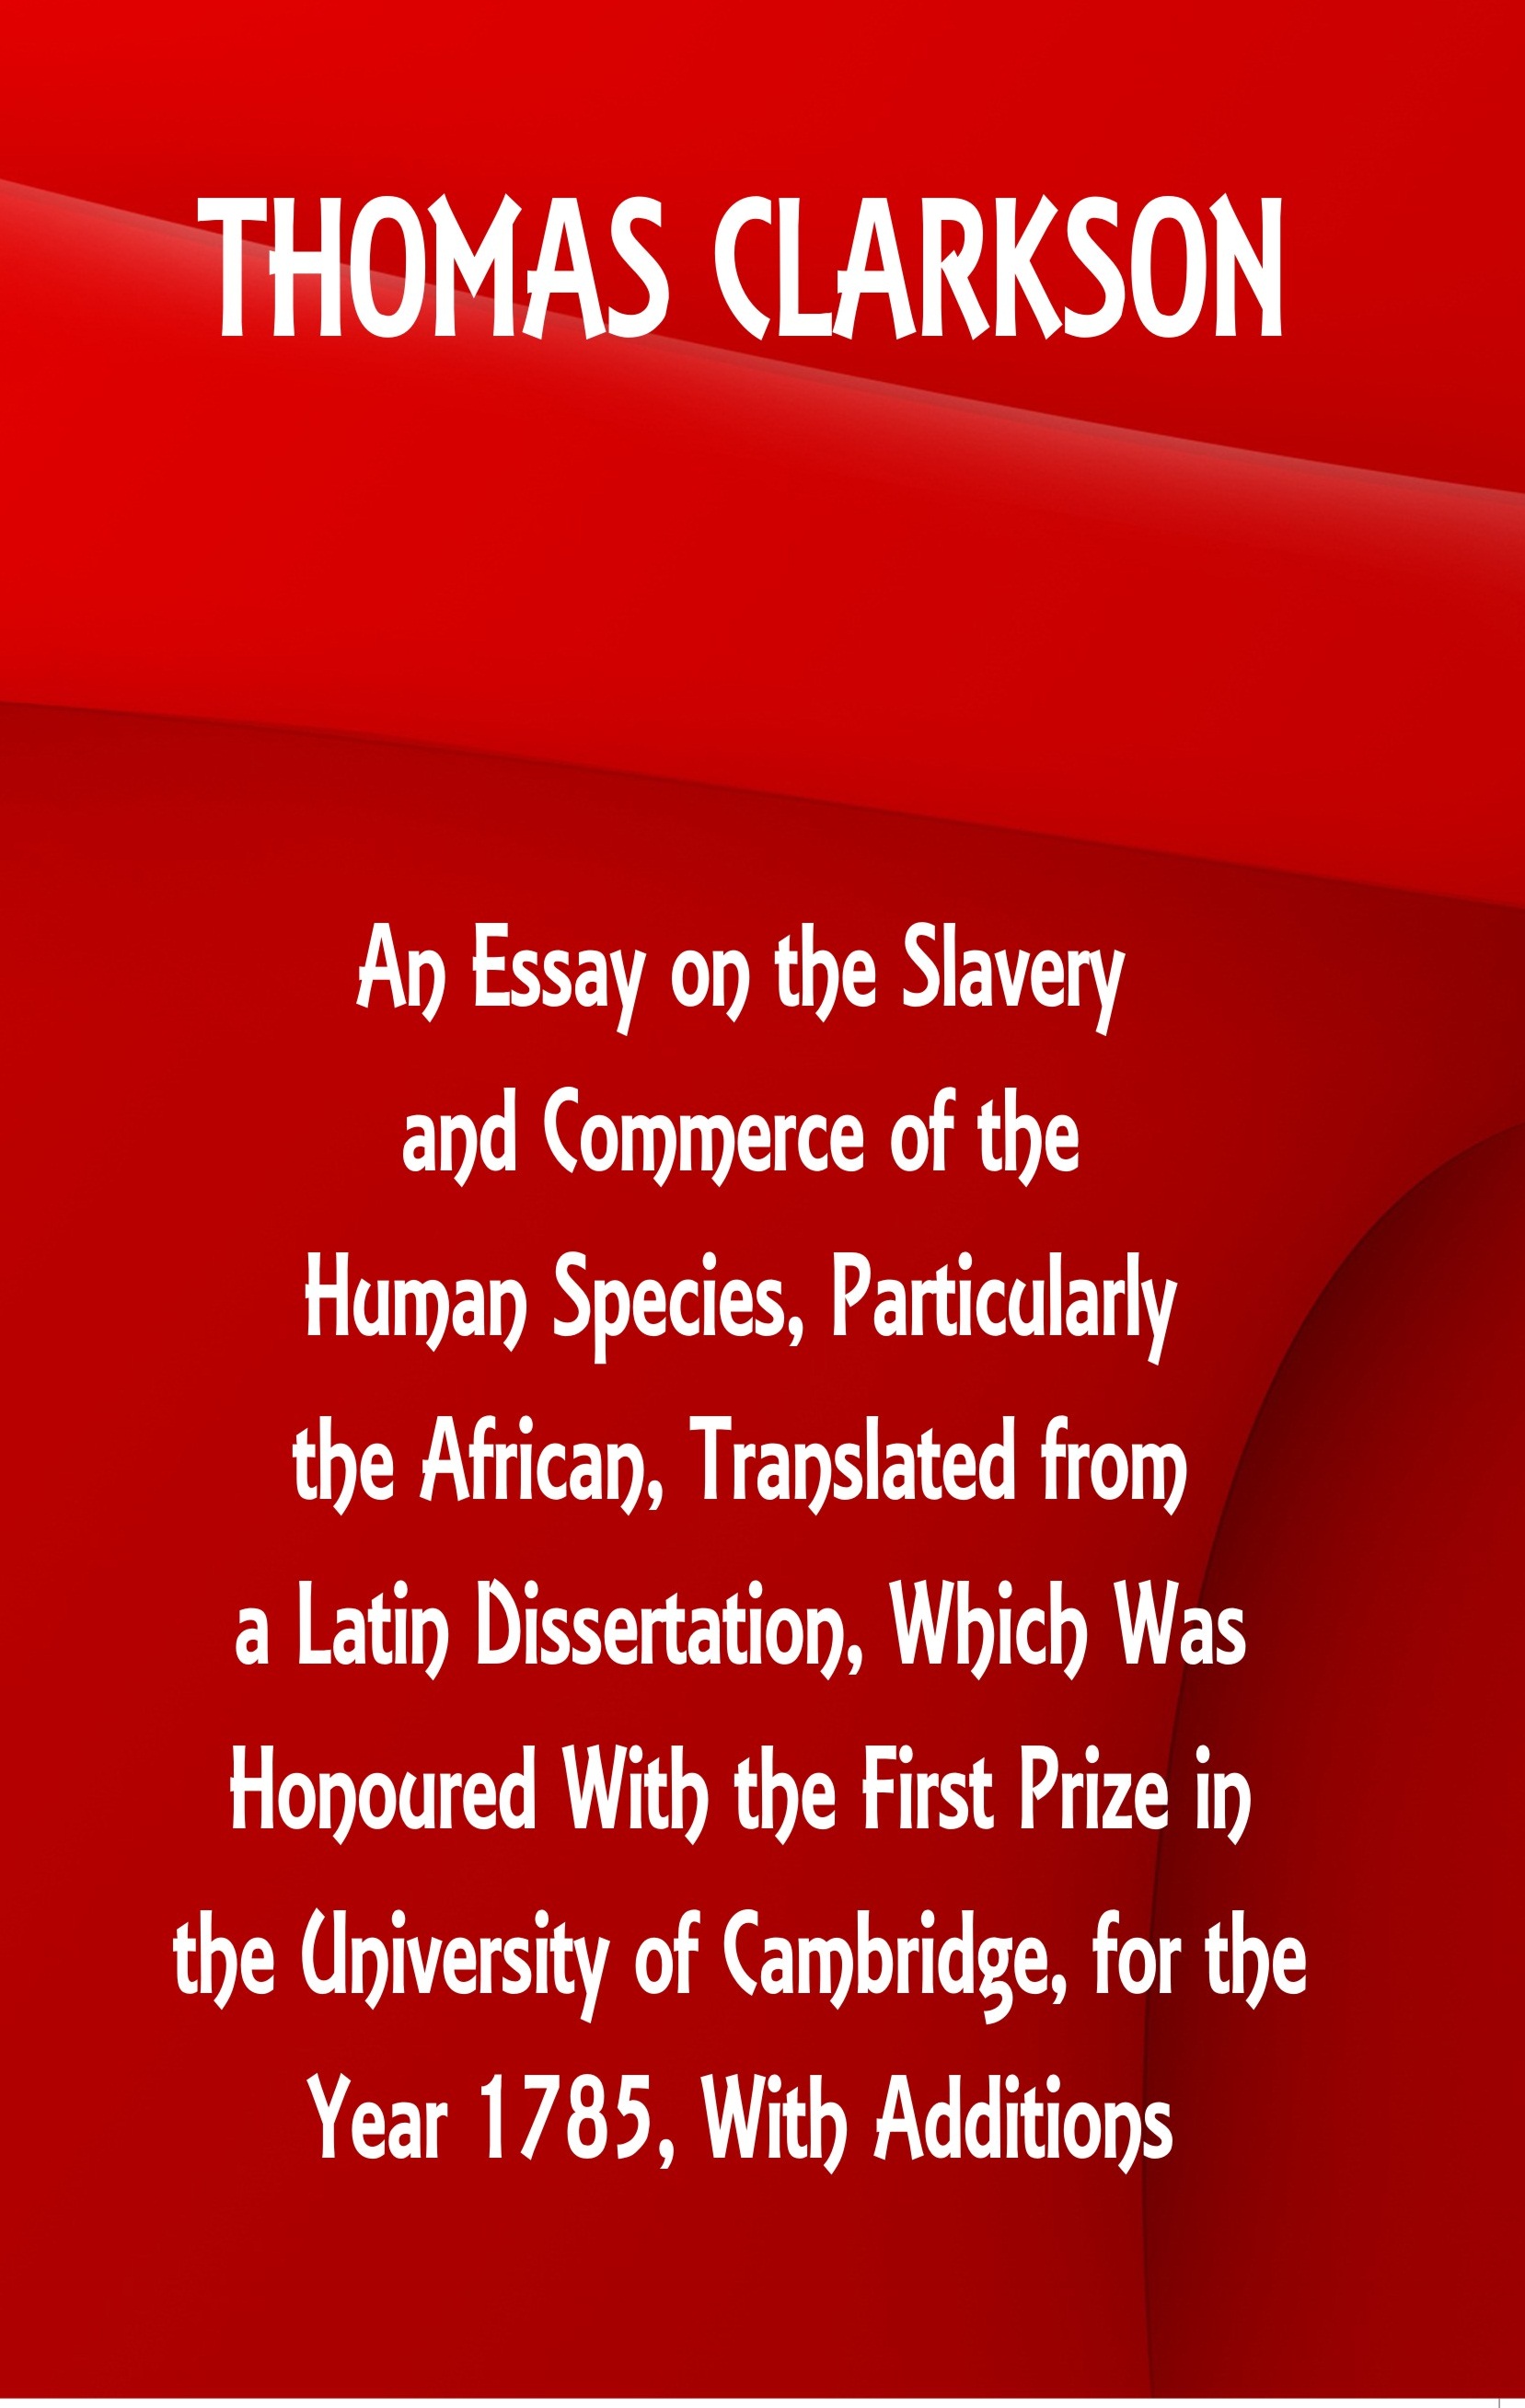 An Essay on the Slavery and Commerce of the Human Species, Particularly the African ,Translated from